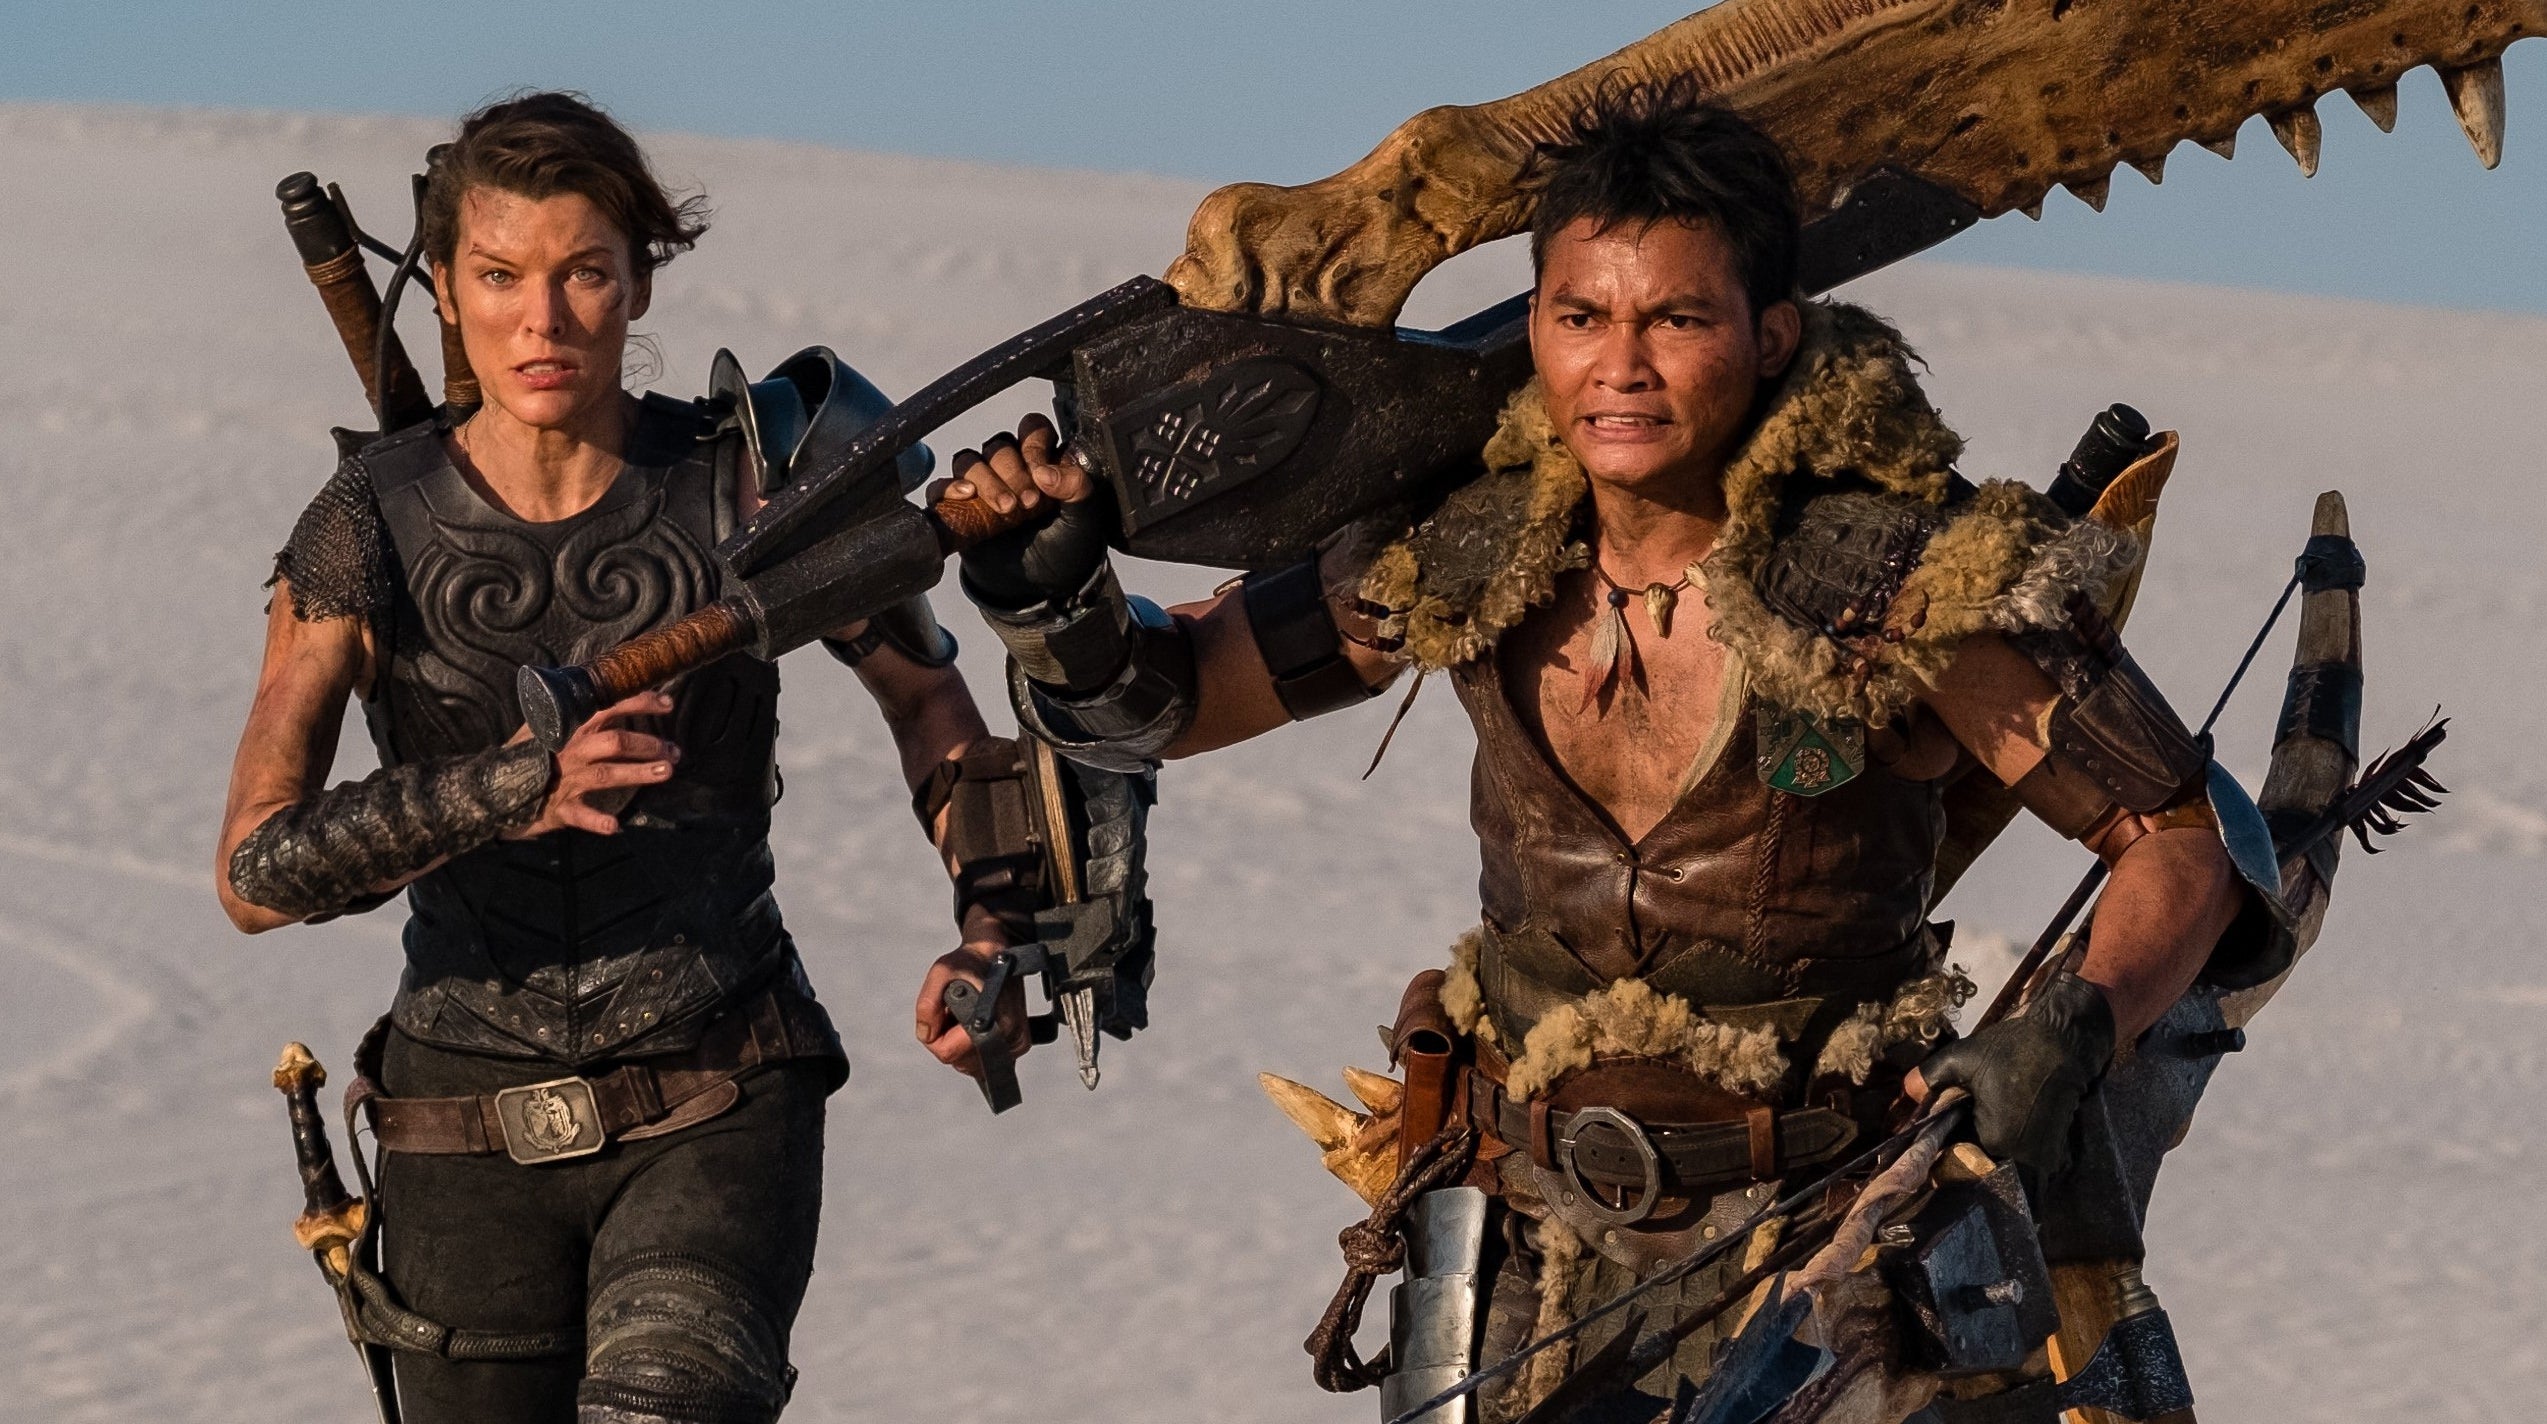 Image for Capcom's Monster Hunter movie is finally looking like Monster Hunter in new image